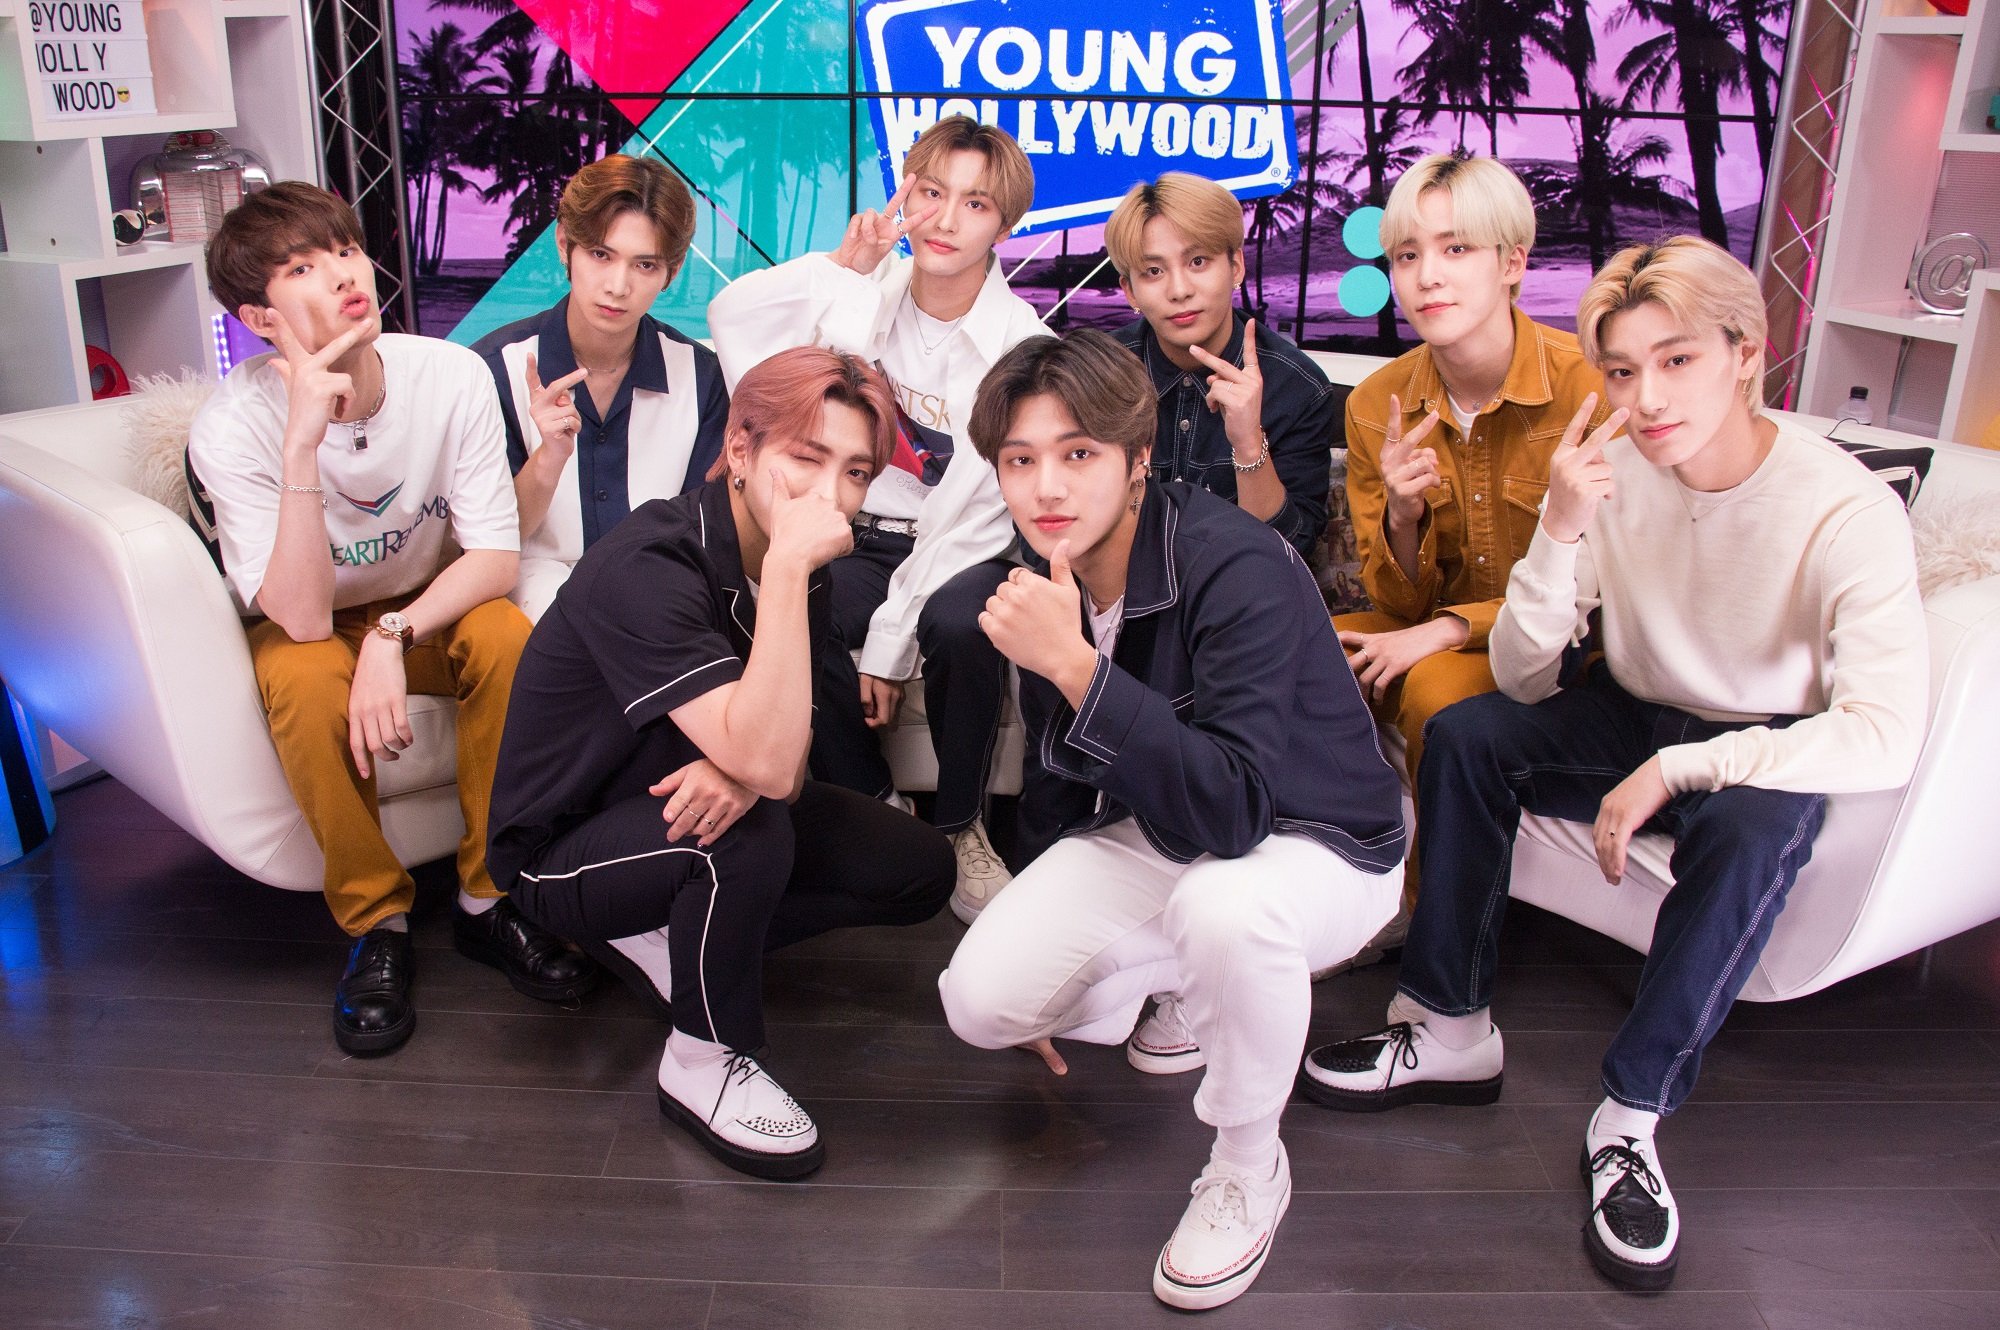 The members of ATEEZ pose at the at the Young Hollywood Studio in 2019